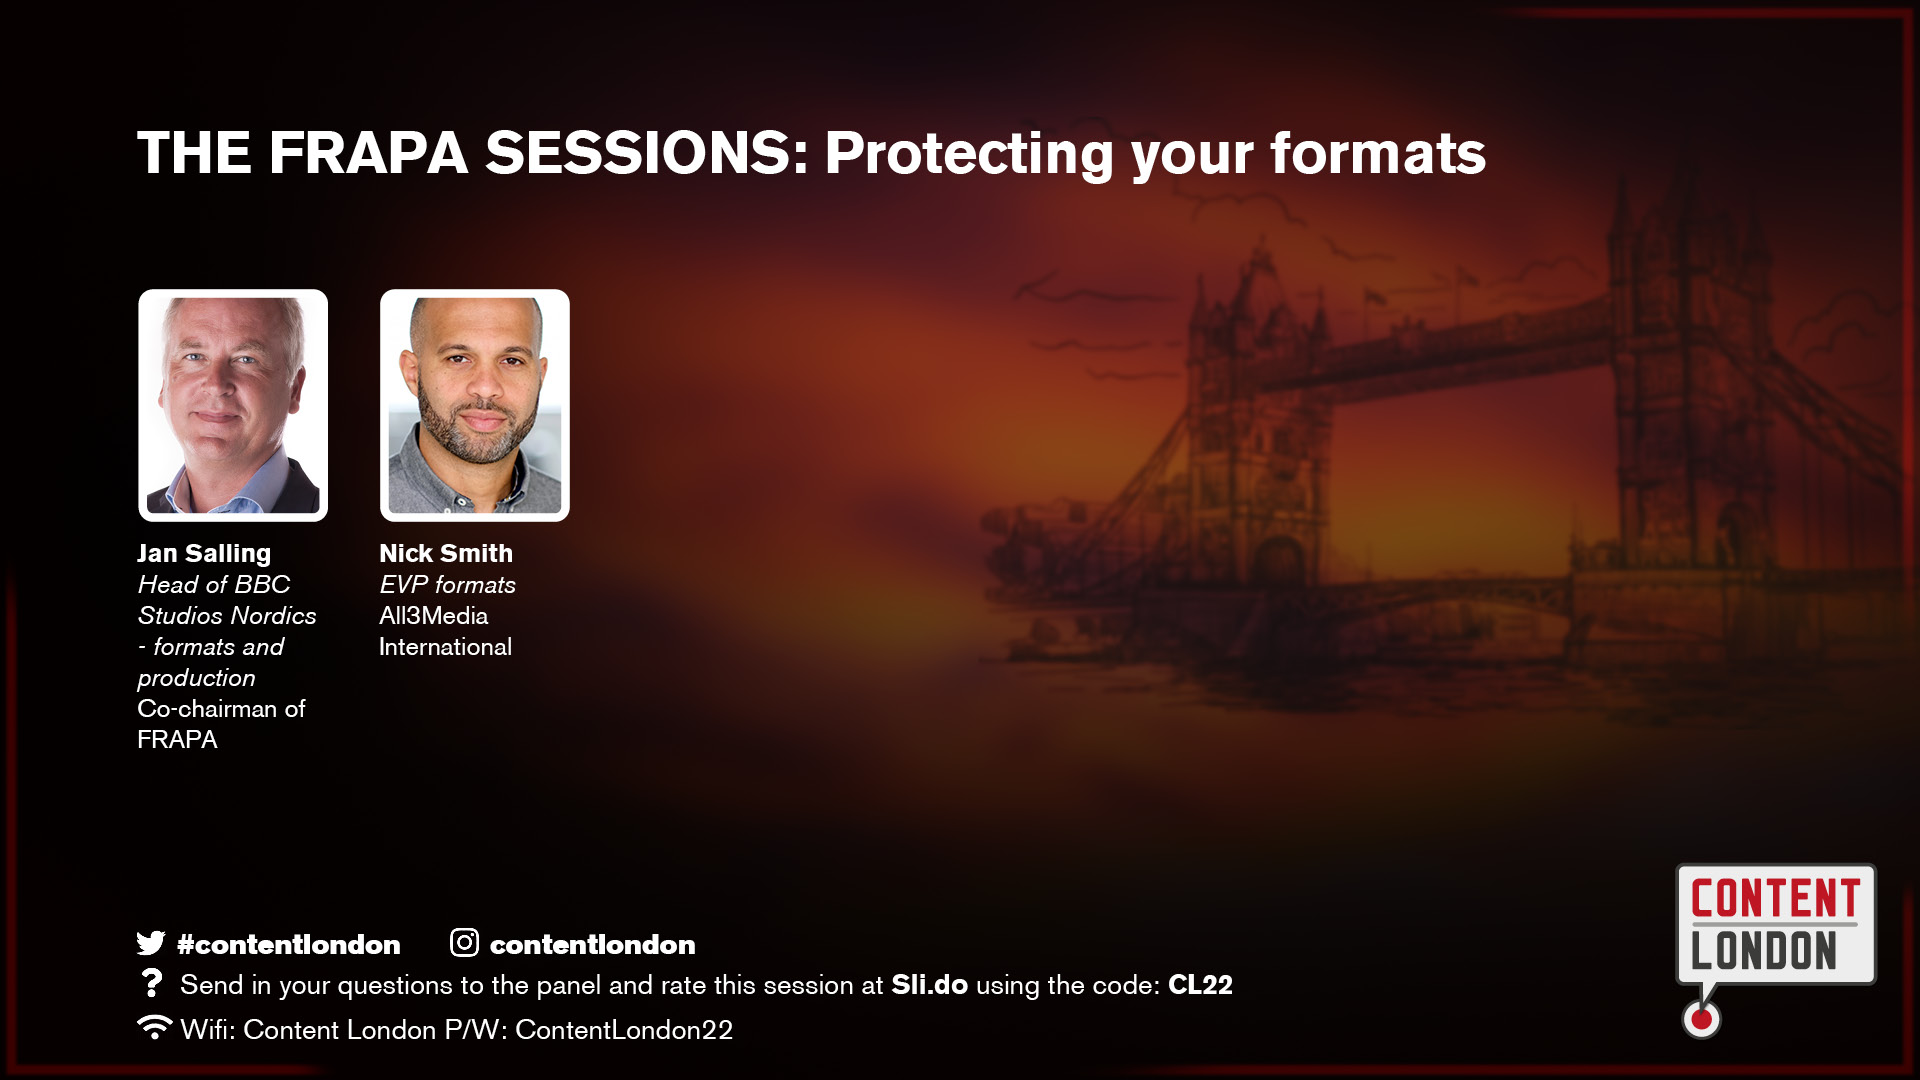 THE FRAPA SESSIONS: Protecting your formats